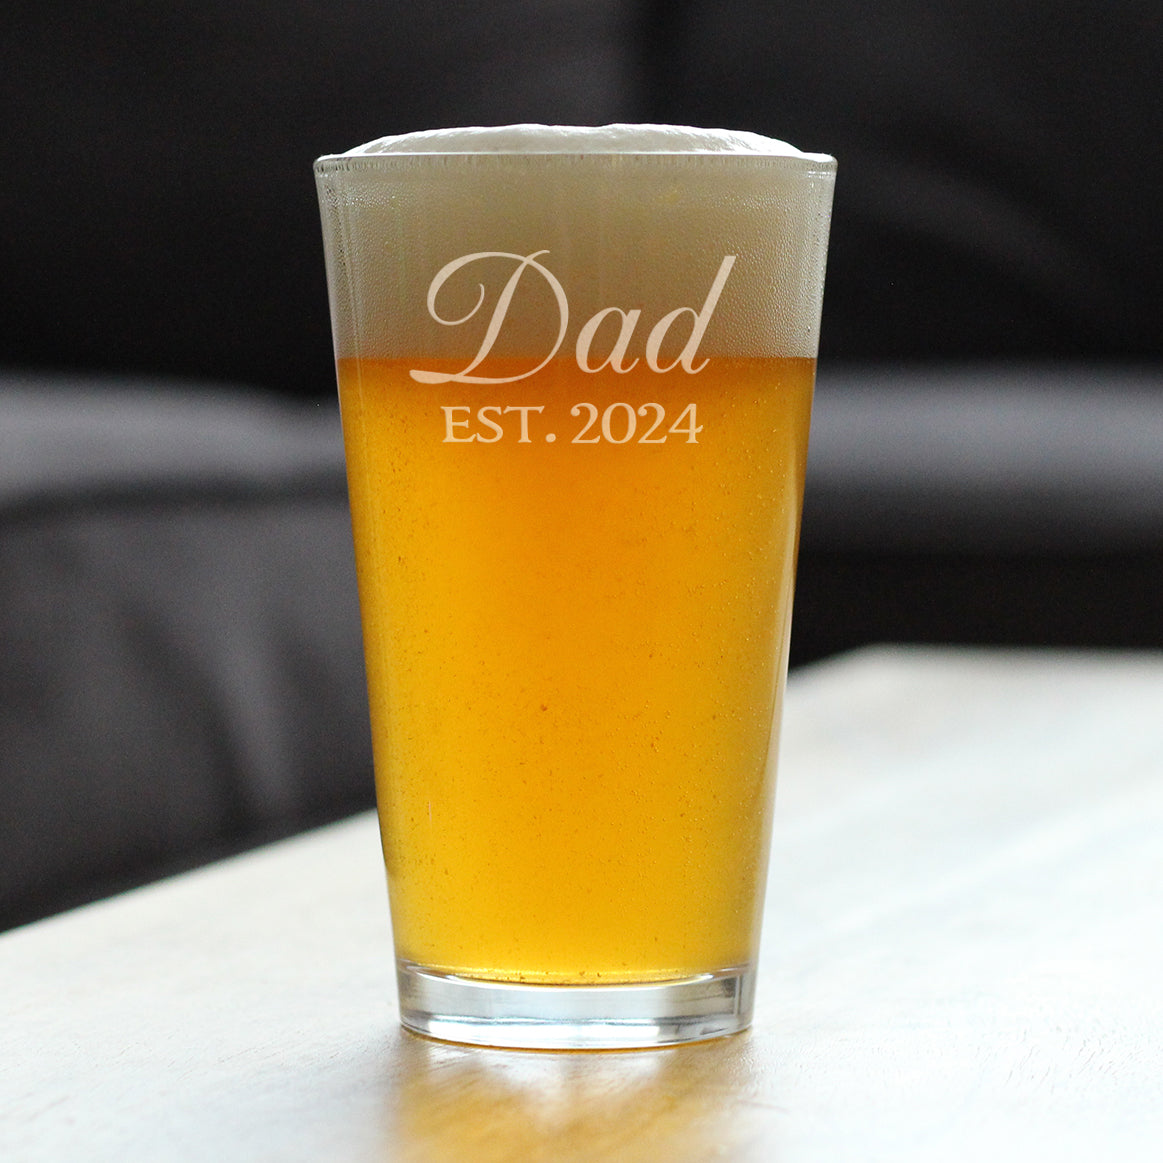 Dad Est 2024 - New Father Pint Glass Gift for First Time Parents - Decorative 16 Oz Glasses